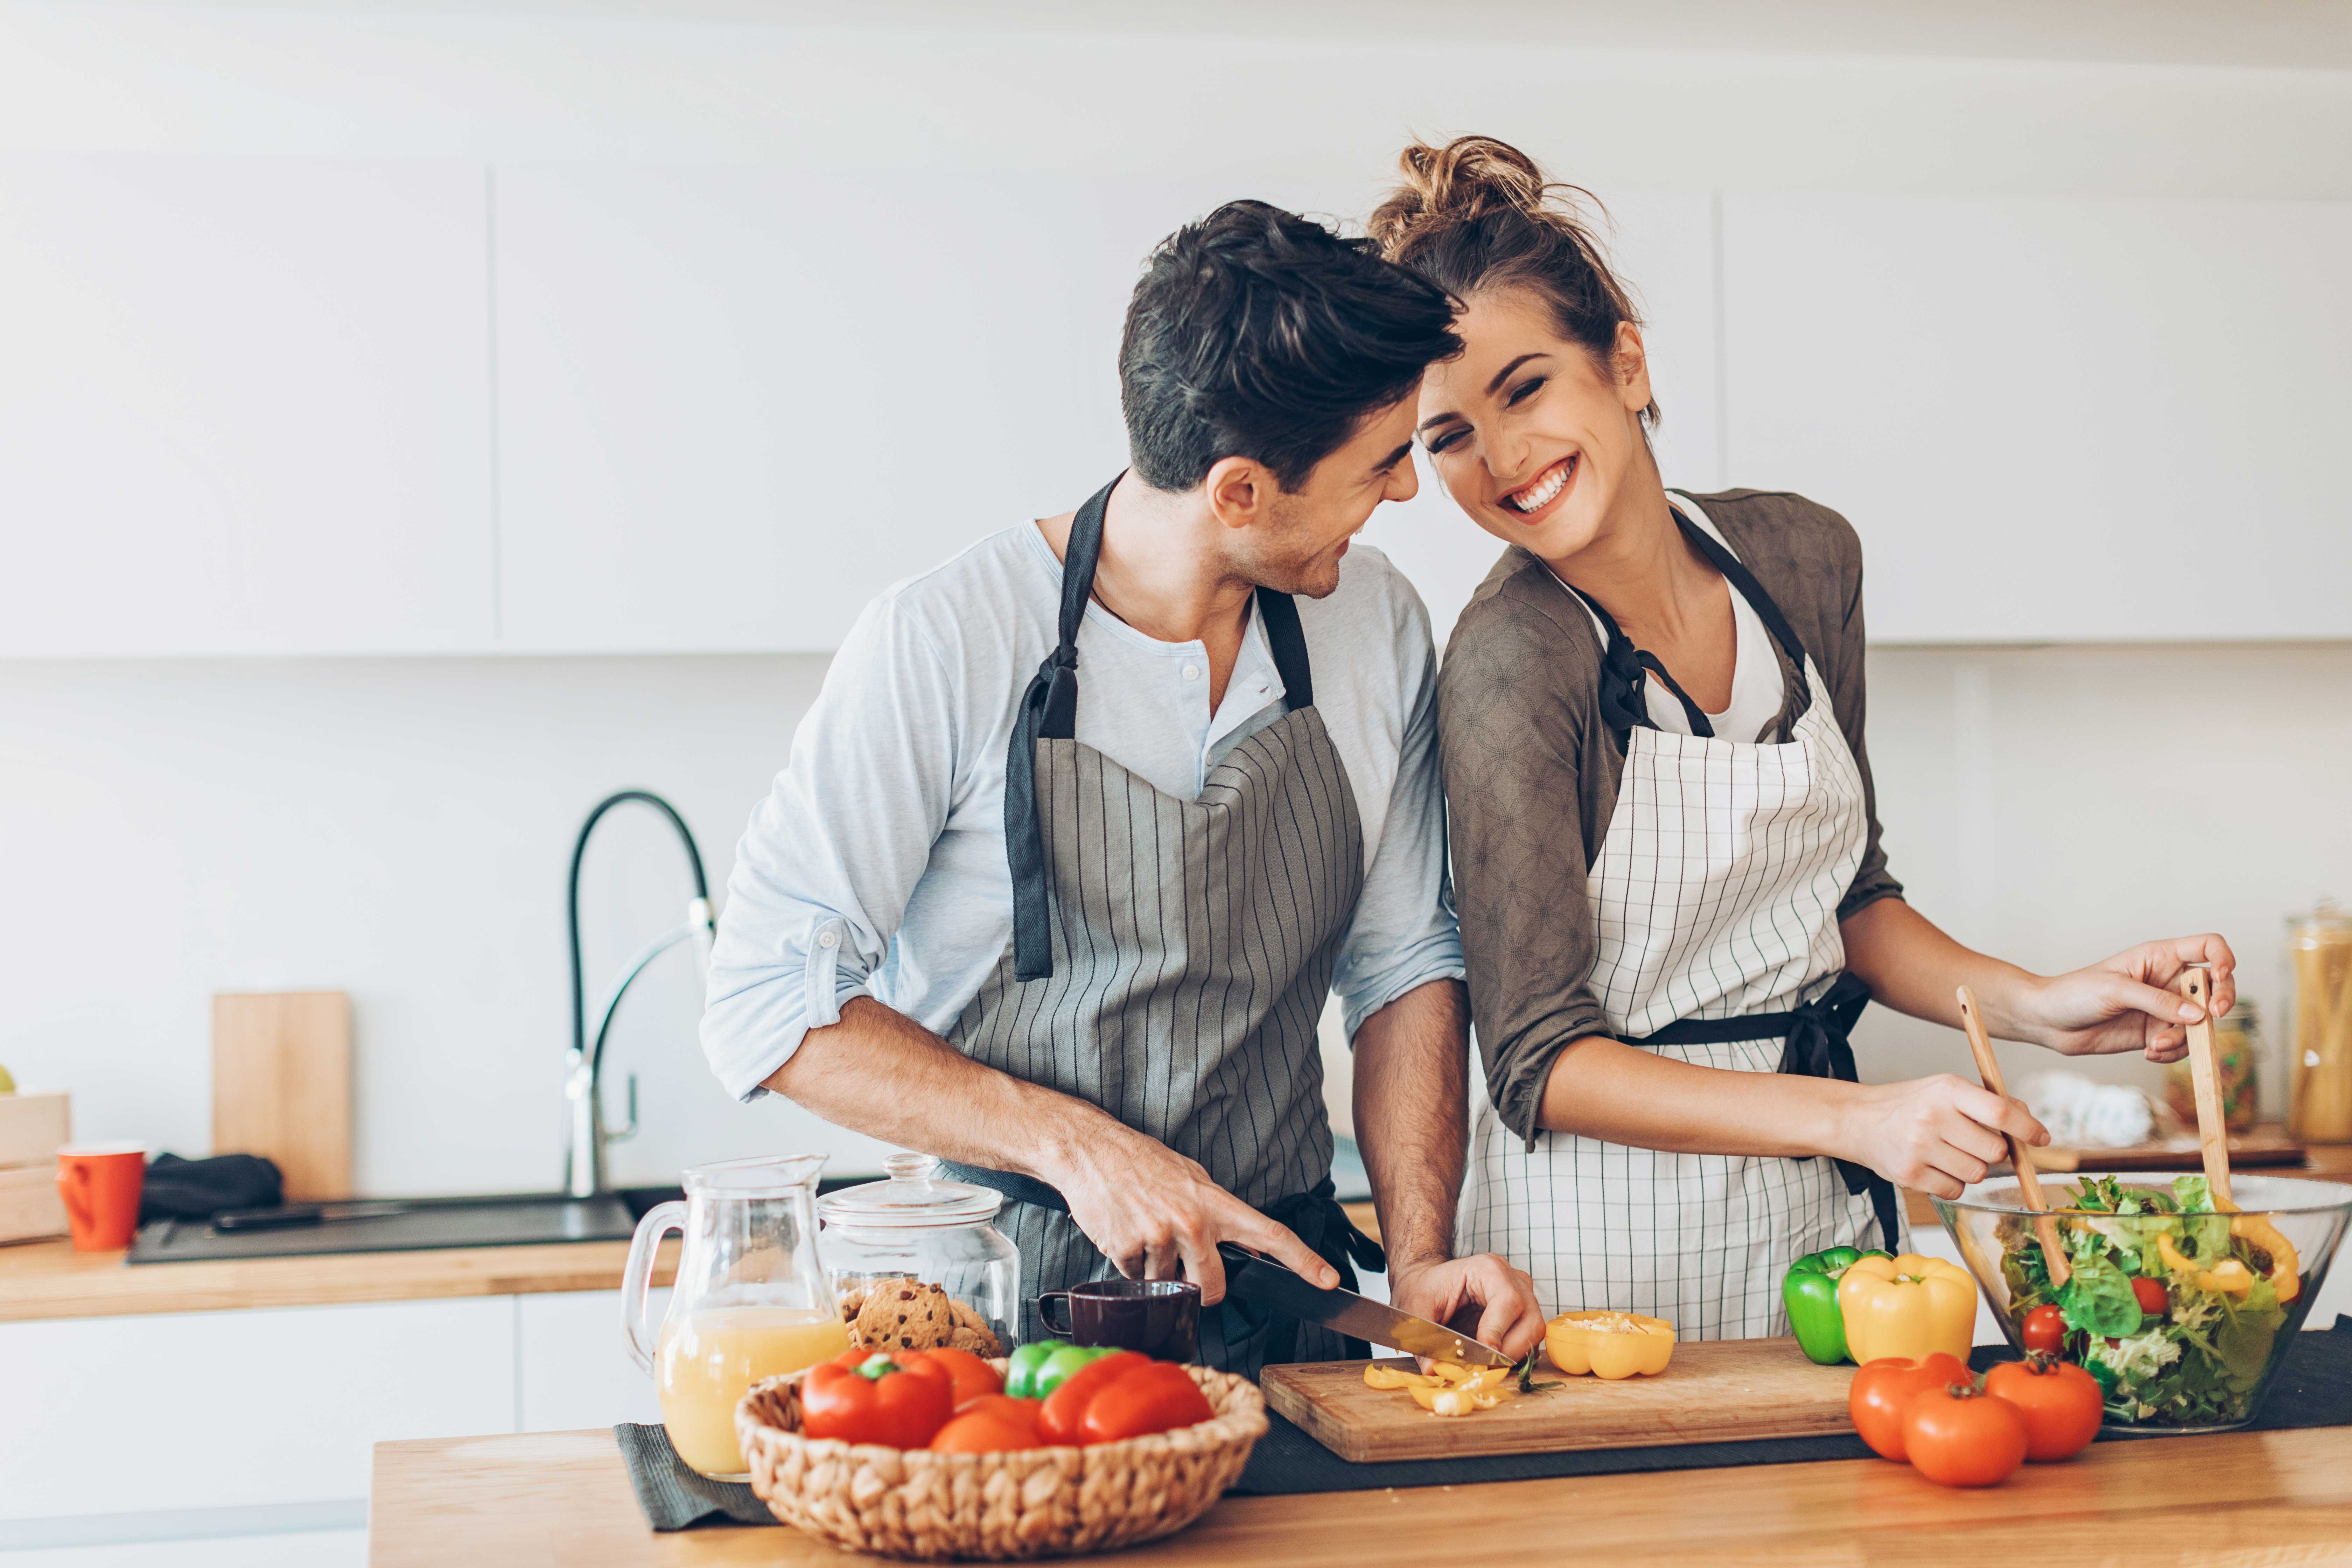 http://www.auburnhomes.ca/wp-content/uploads/2018/10/Happy-Couple-Cooking-in-Kitchen_Web.jpg